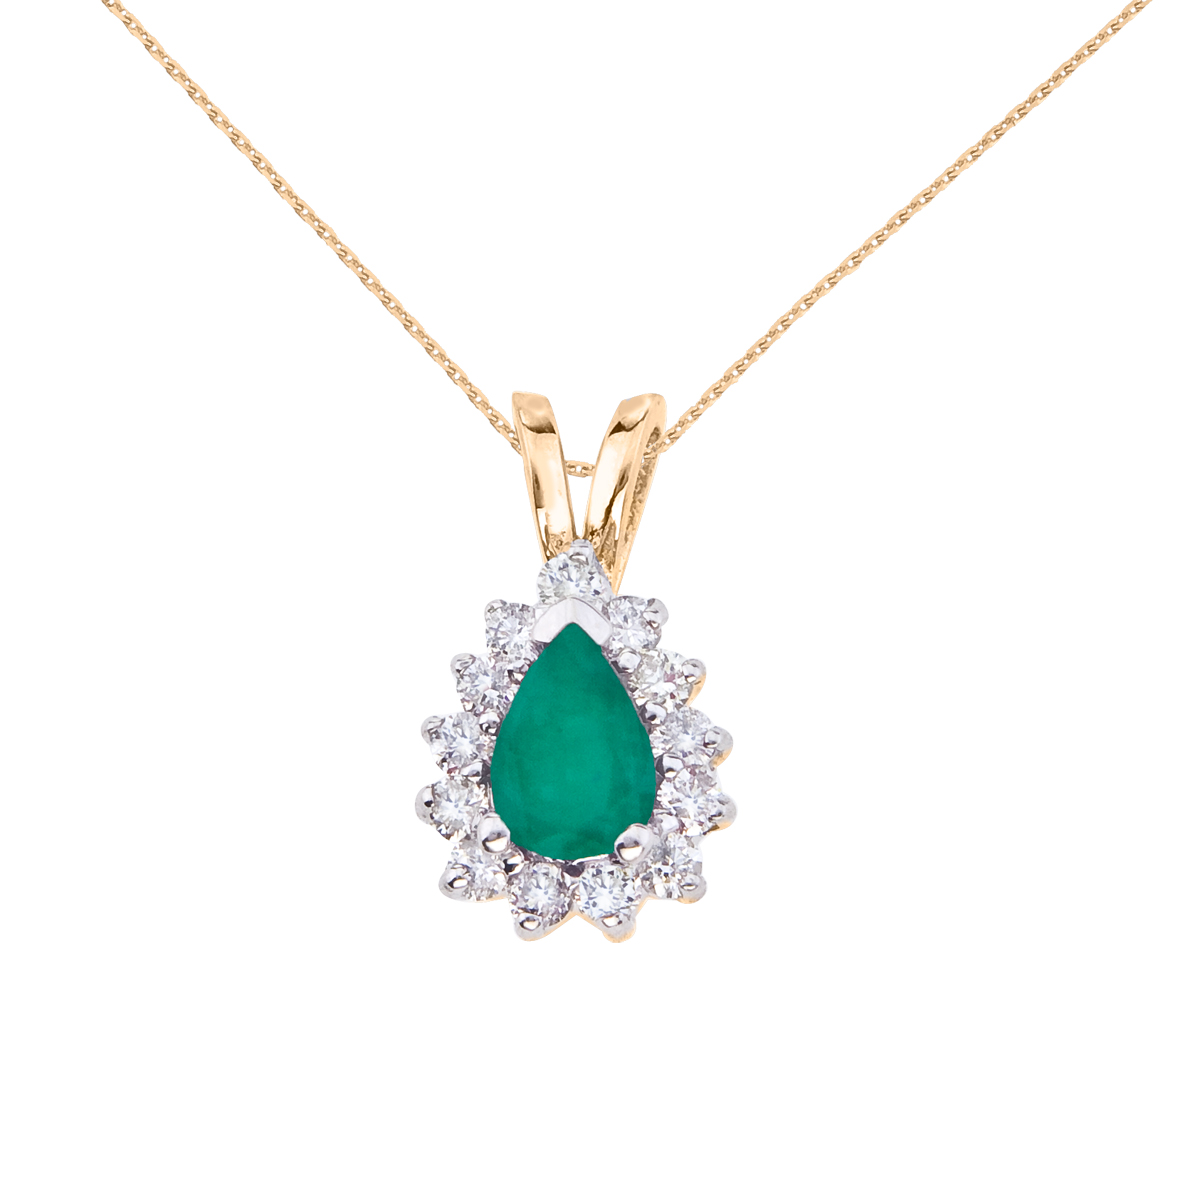 6x4 mm oval natural emerald pendant accented with bright diamonds set in 14k yellow gold.